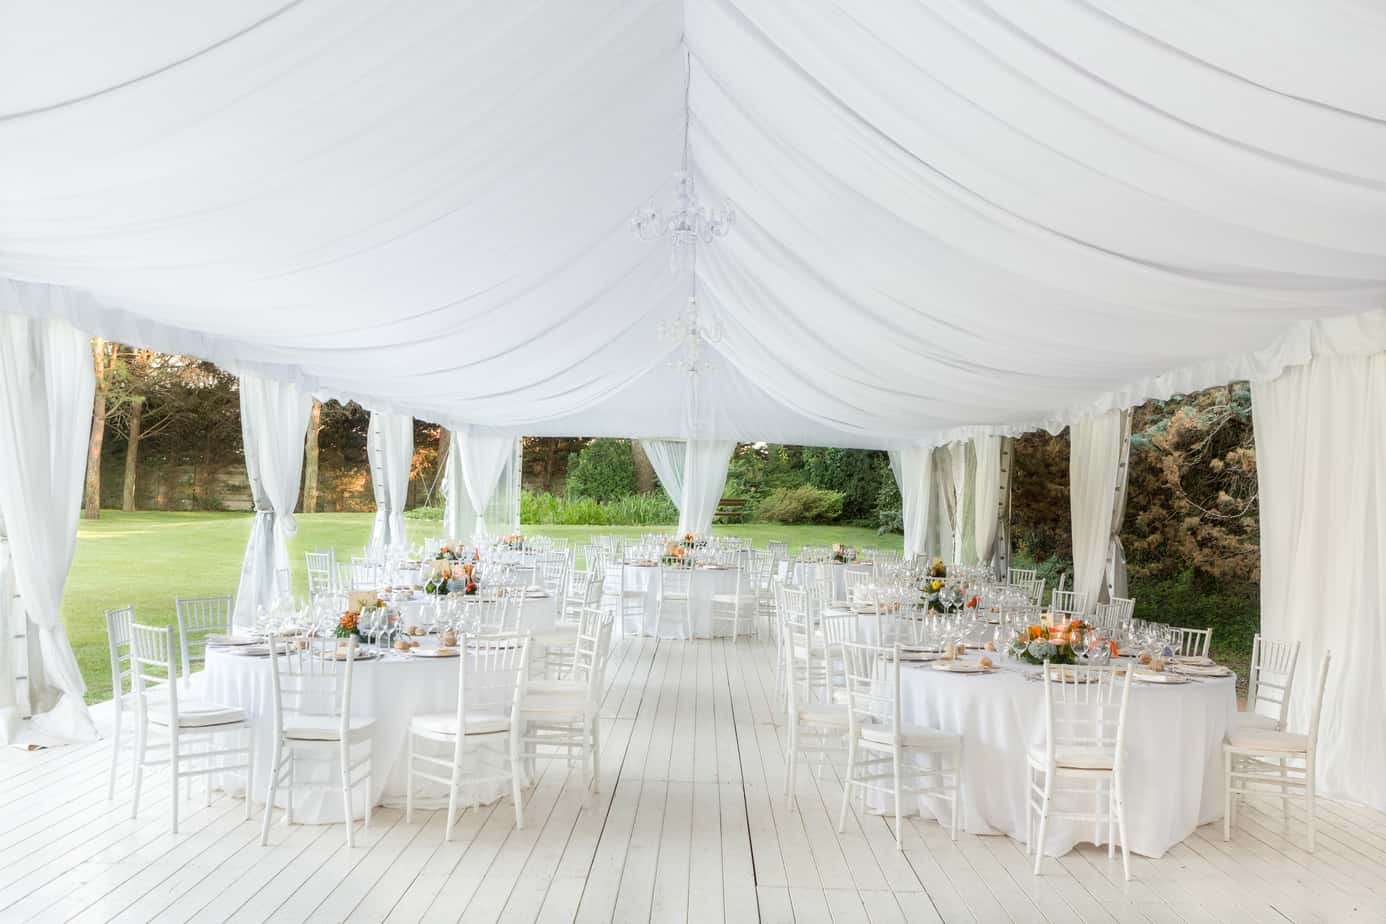 Summer Parties: Keep the Sun at Bay with a Tent or Canopy